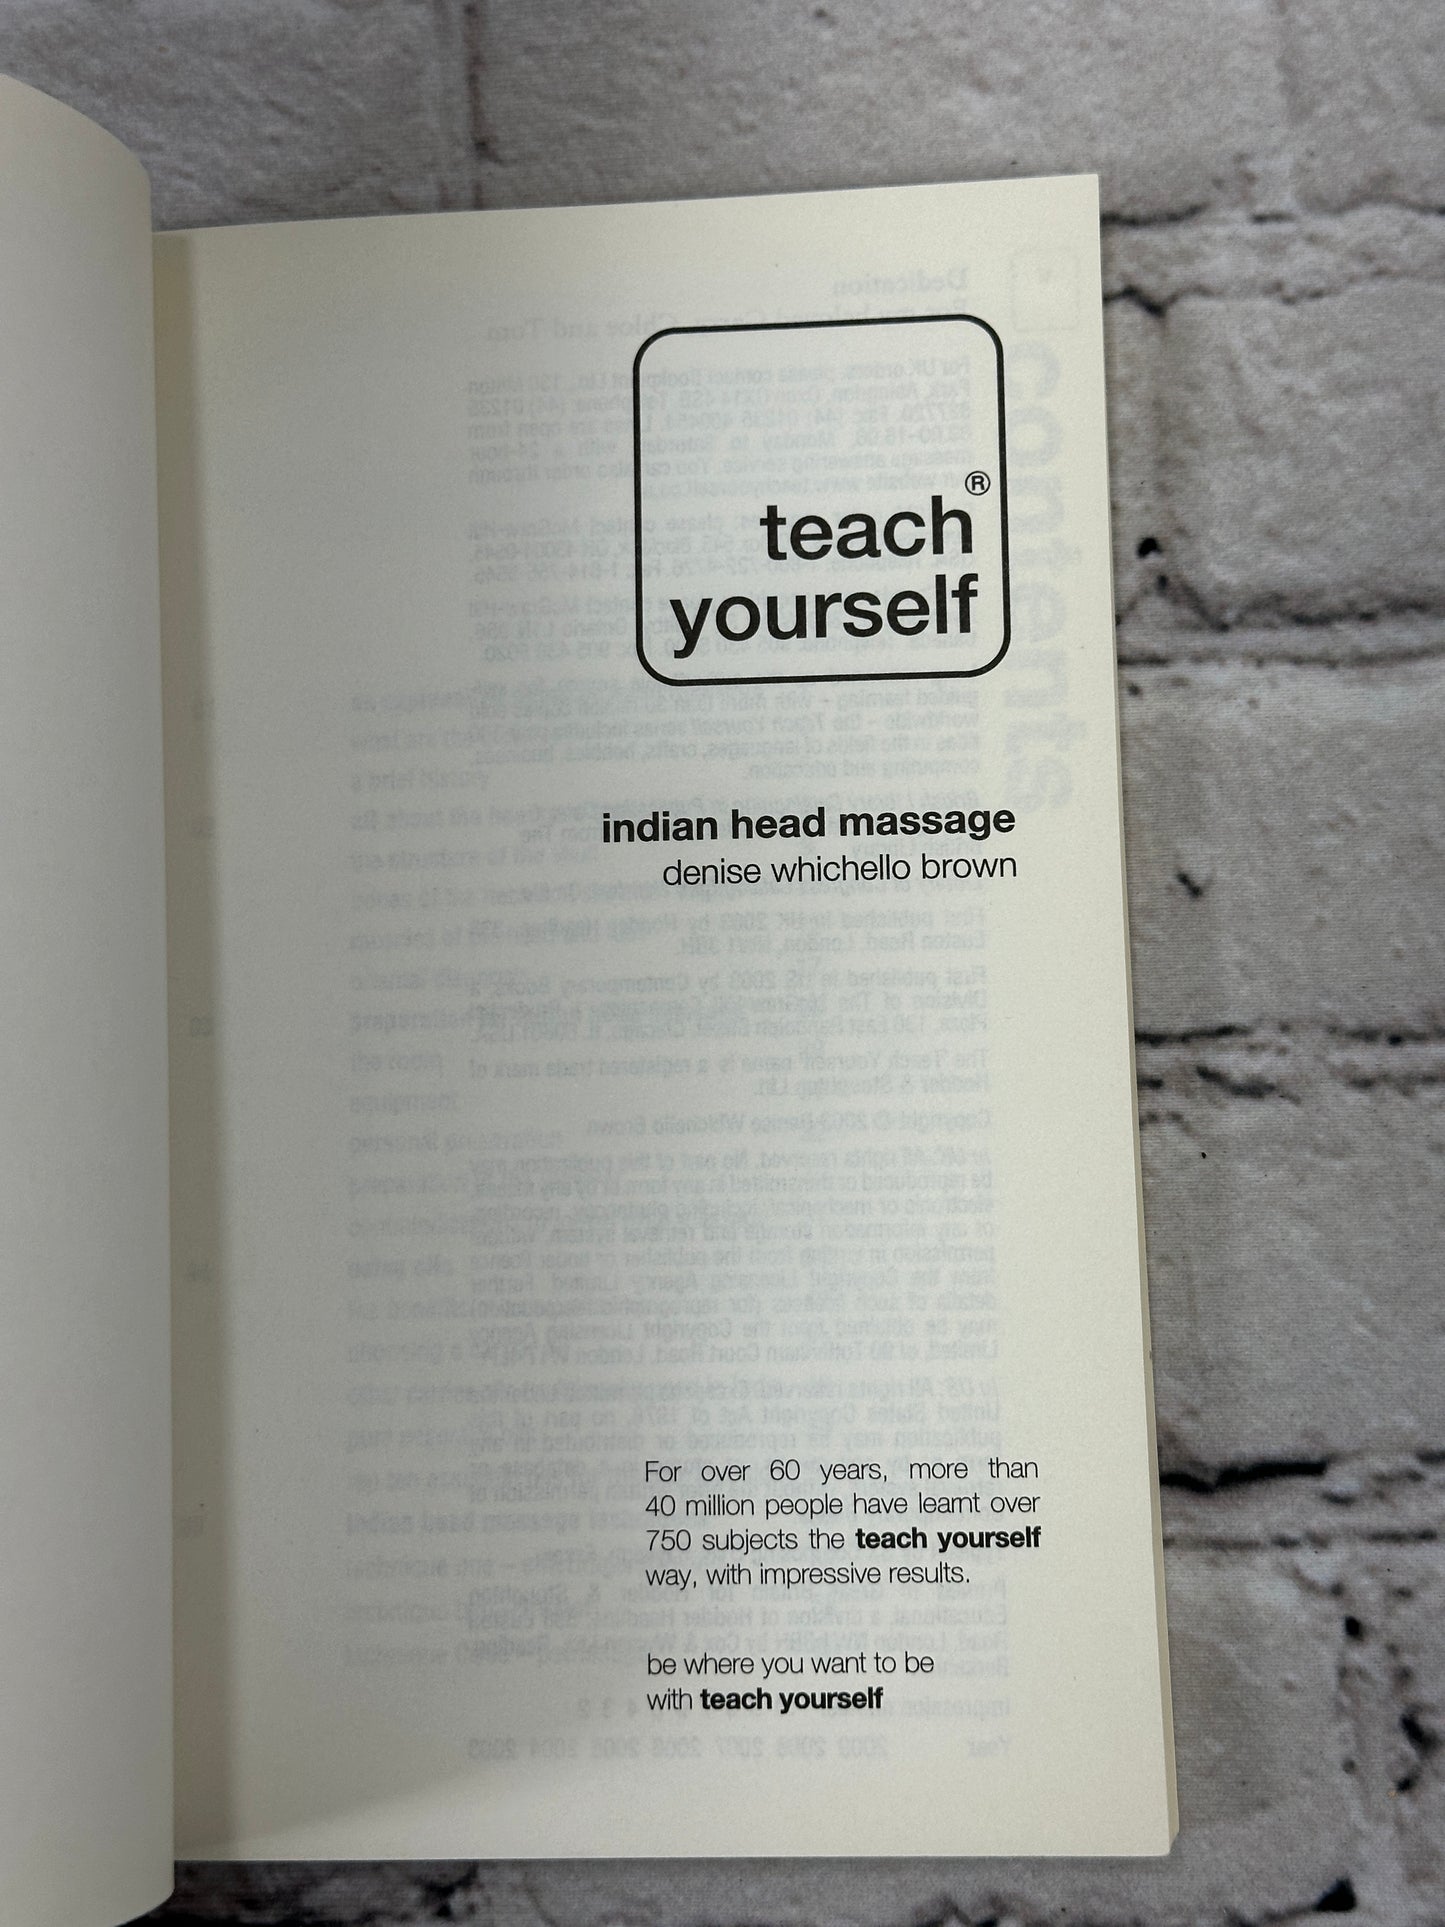 Teach Yourself Indian Head Massage by Denise Whichello Brown [2003]